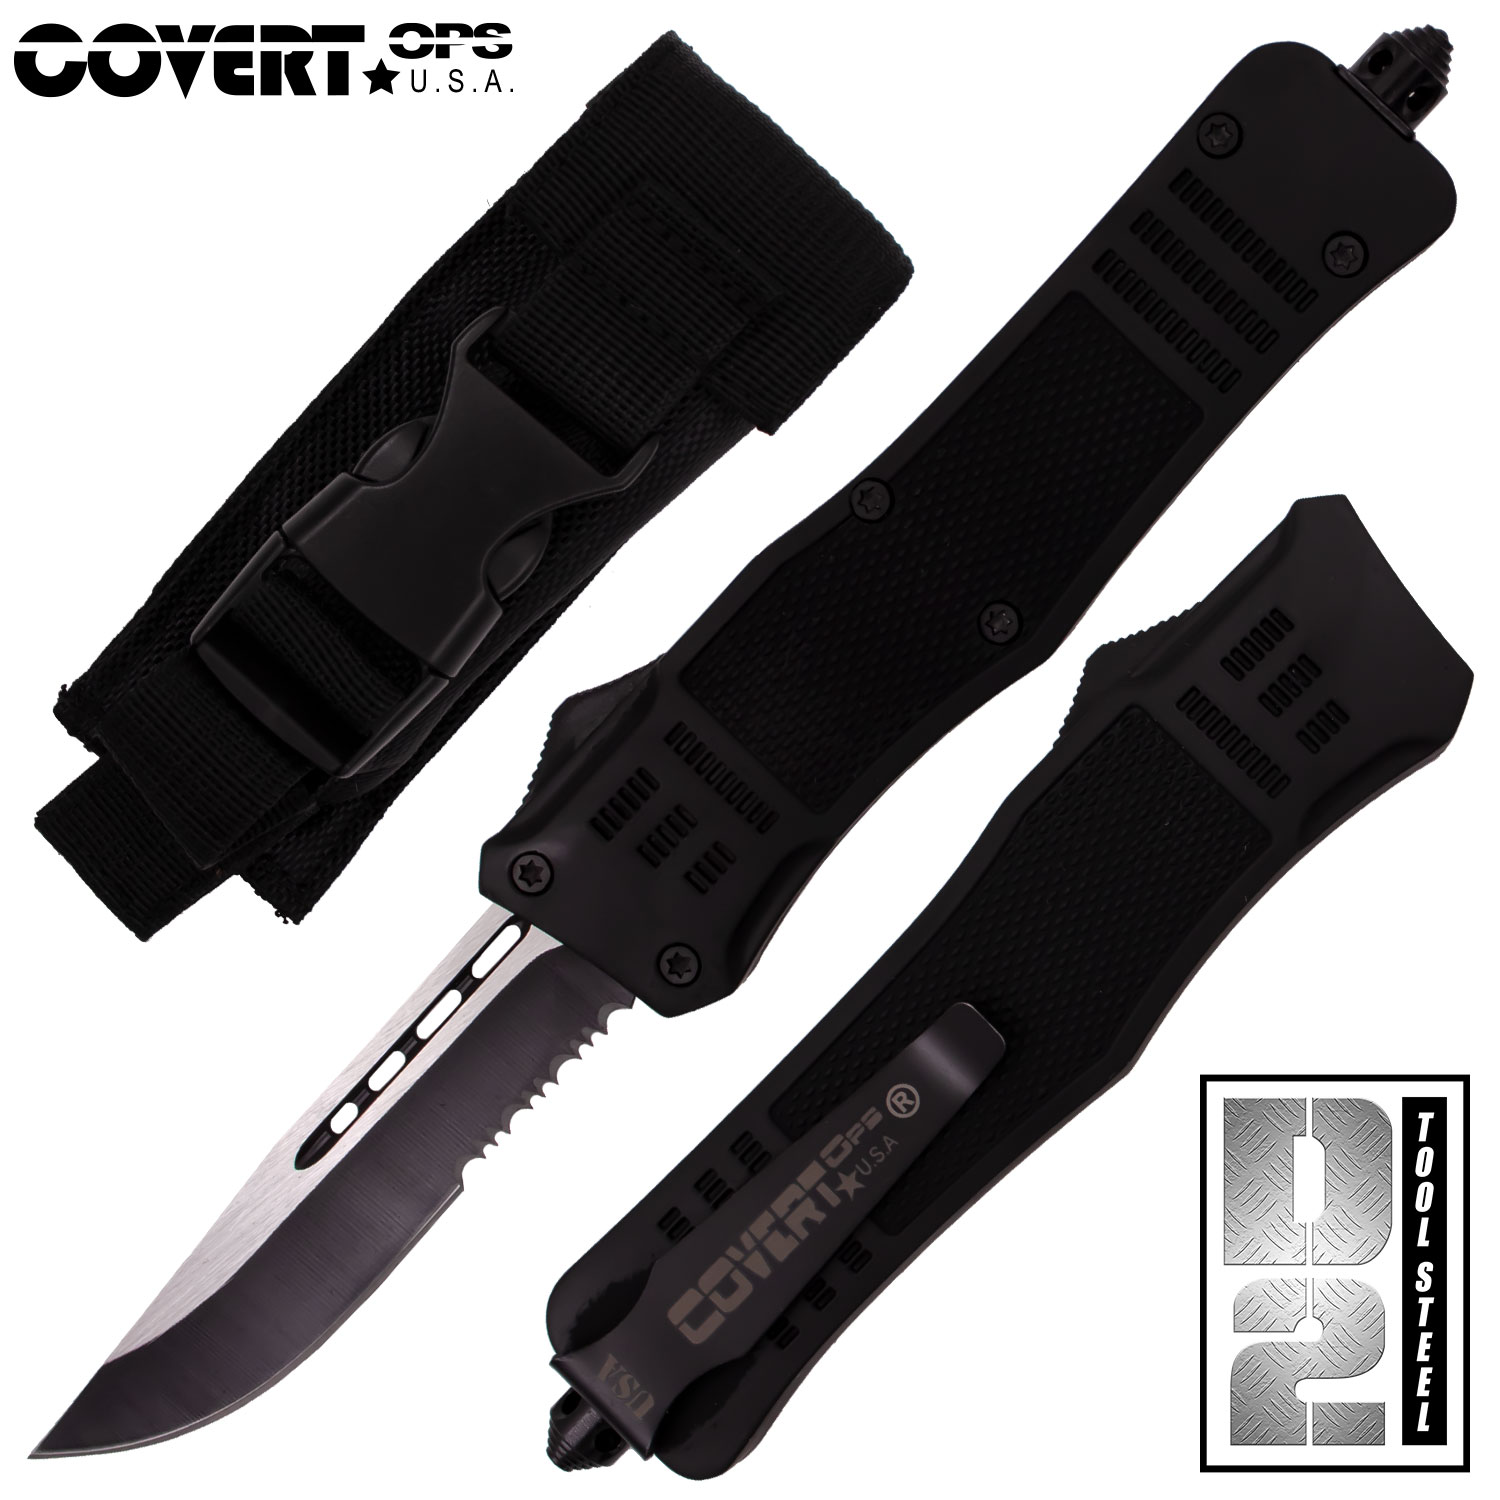 Covert OPS USA OTF Automatic Knife 9 inch Black DP D2 Steel Blade HSerr